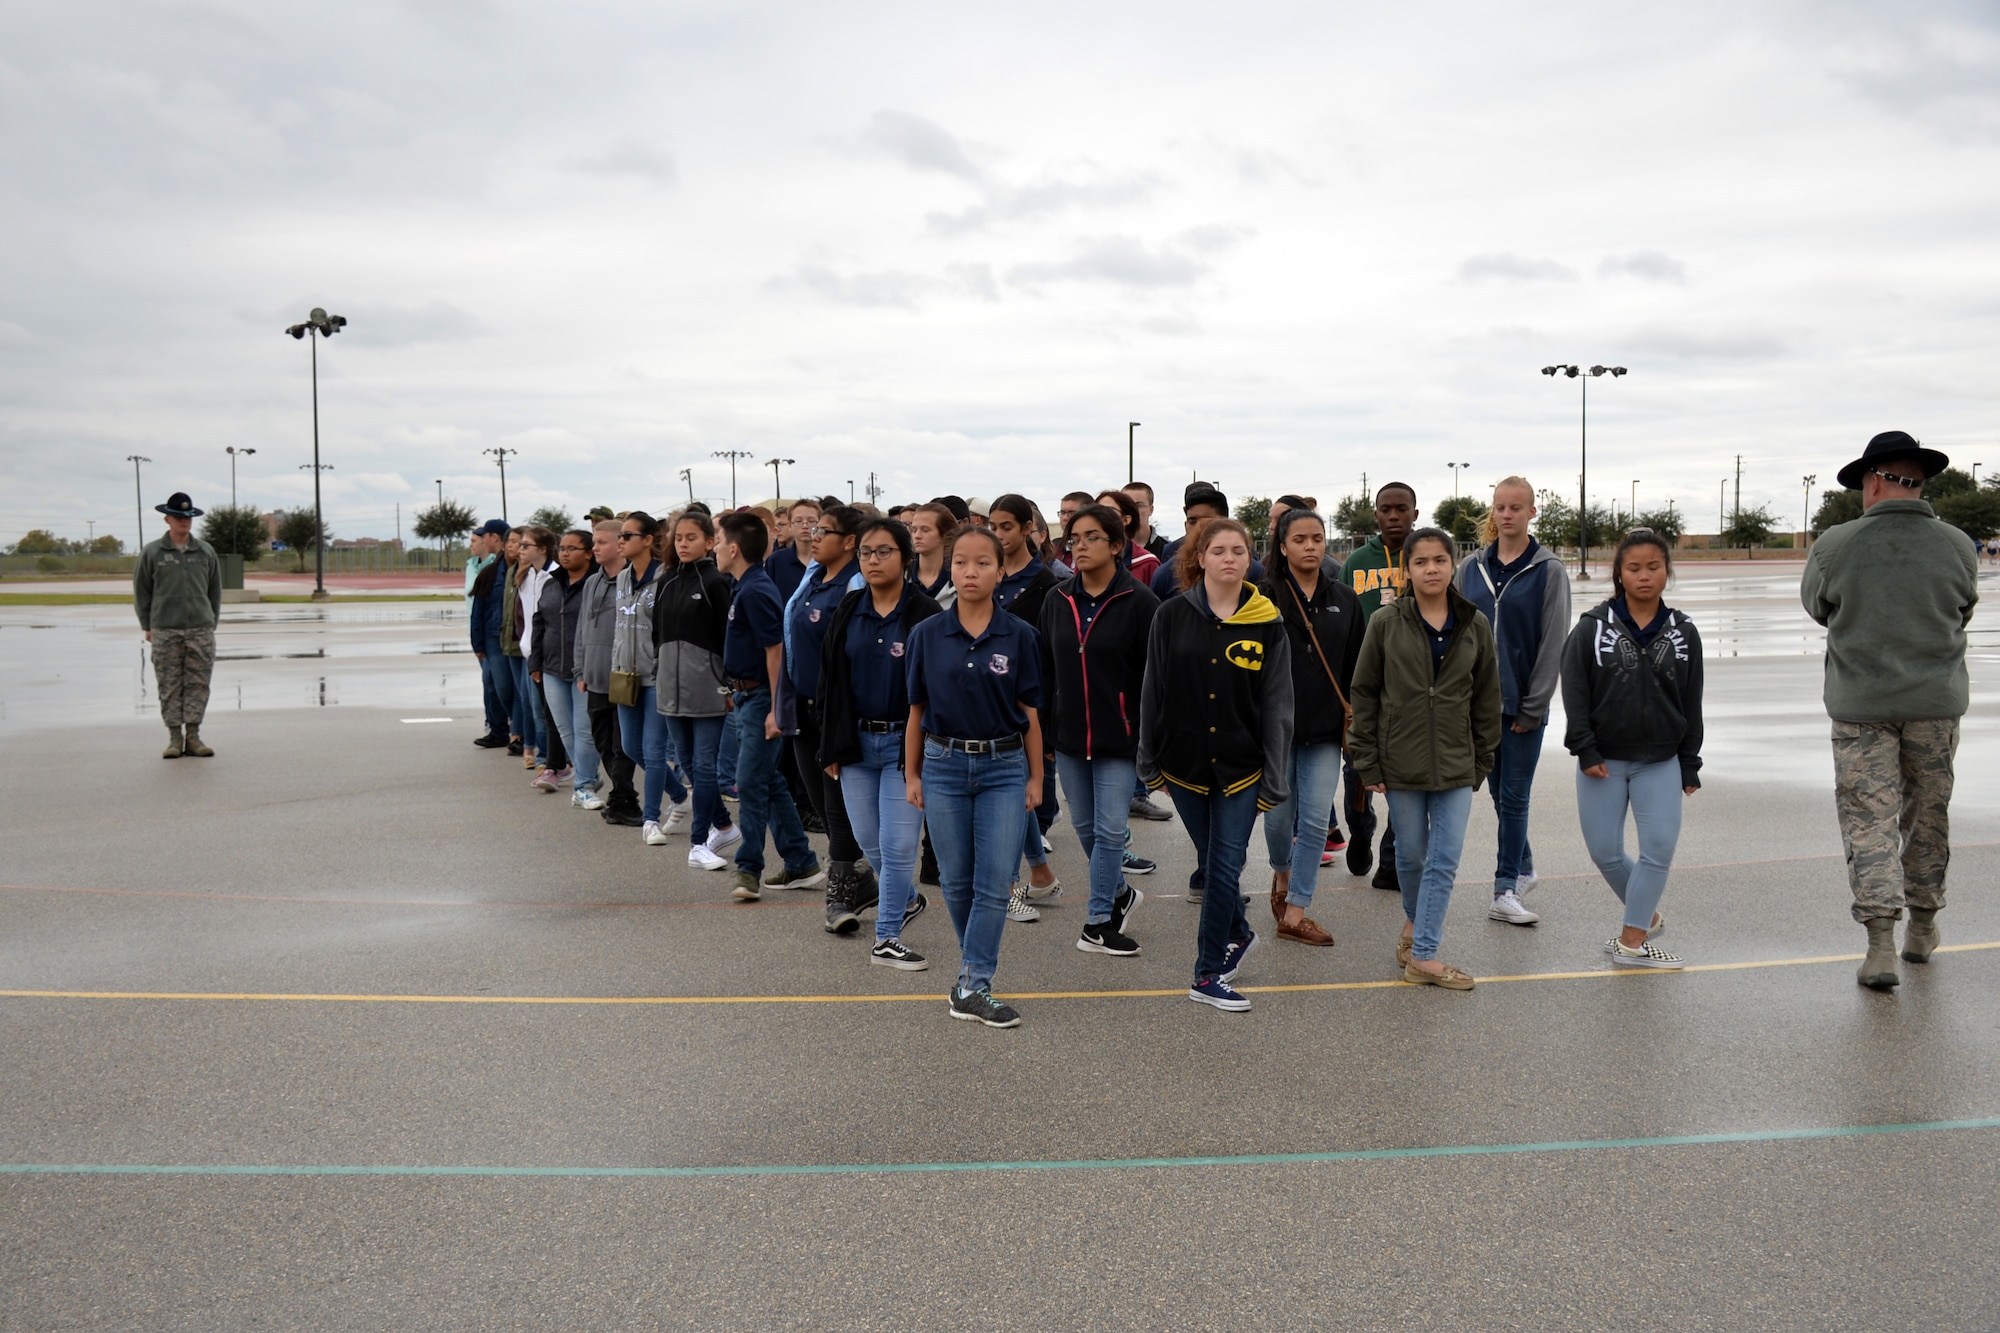 Senior Master Sgt. Jason B. Wagner and Master Sgt. Robert E. Elliott, 433rd Training Squadron military training instructors, instruct Rowlett High School Air Force Junior Reserve Officer’s Training Corps cadets on drill movements at Joint Base San Antonio-Lackland, Texas Nov. 9, 2018.